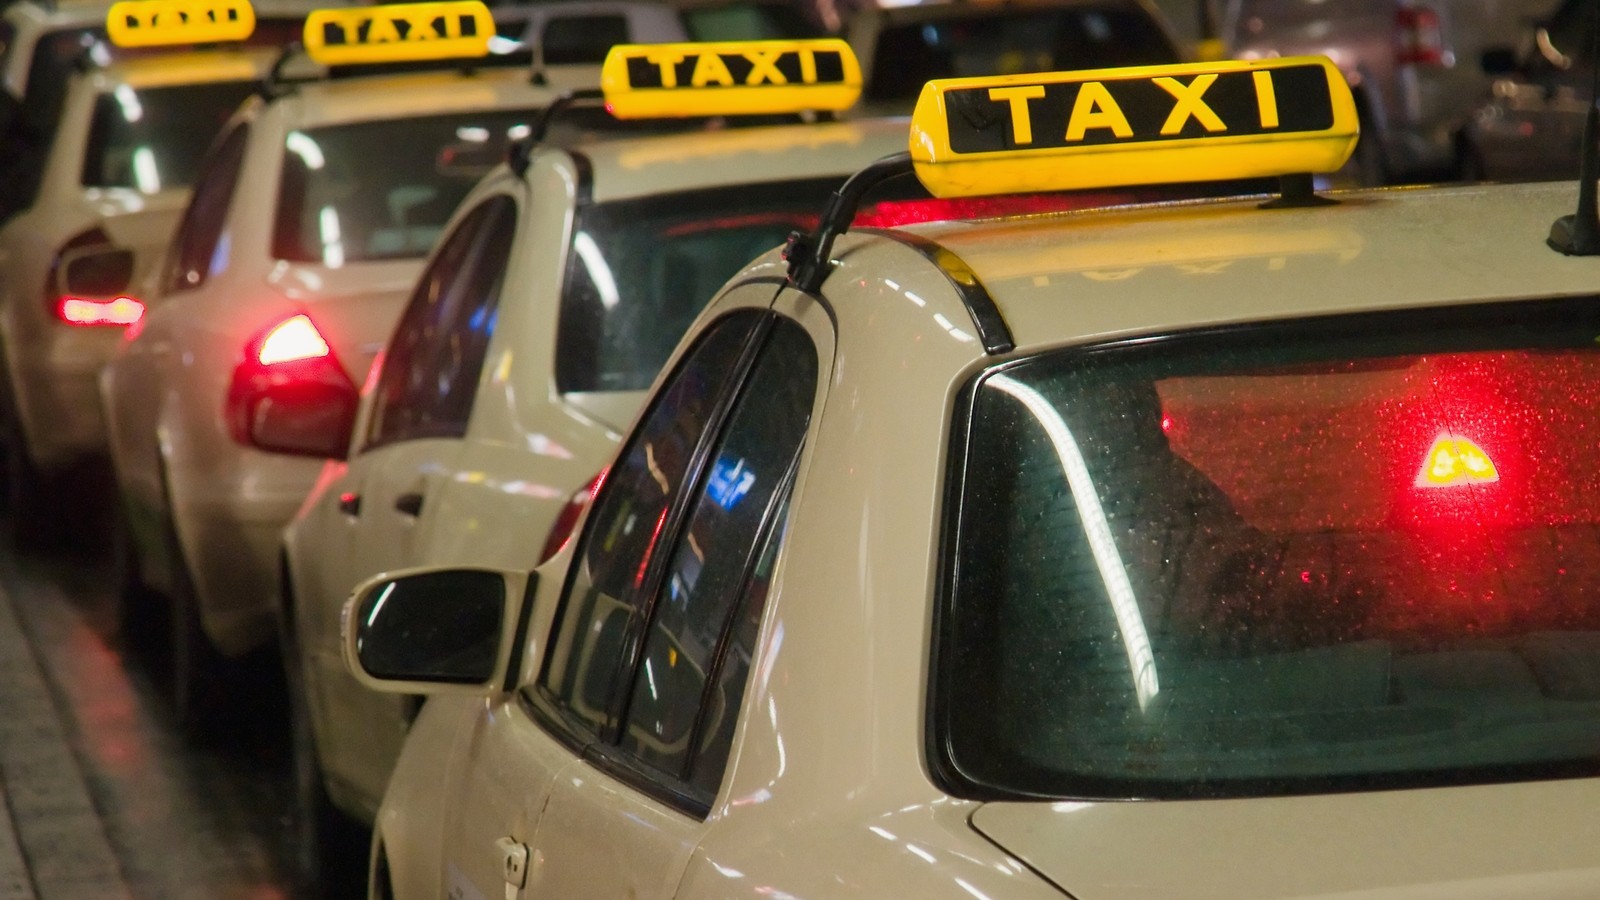 Taxis waiting at the airport